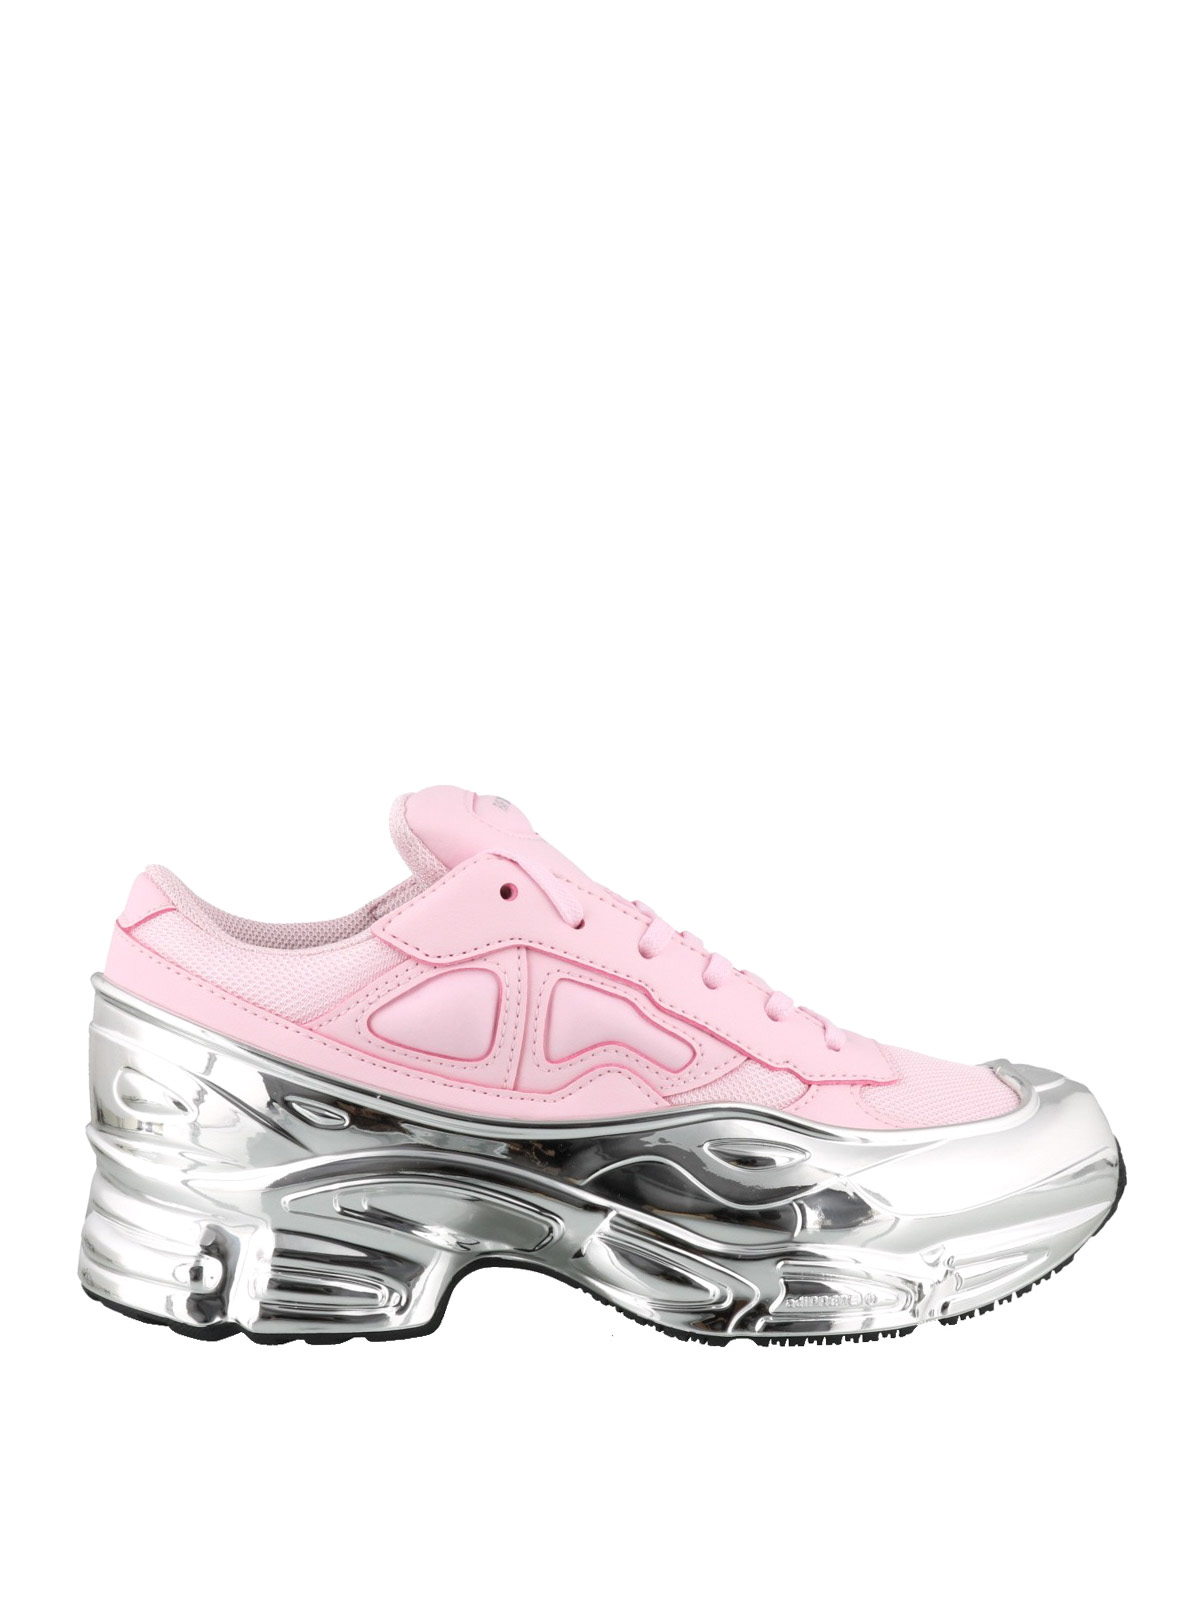 Halvkreds Jonglere Playful Trainers Raf Simons Adidas - Ozweego RS pink and silver chunky sneakers -  EE7947PINKSILVERSILVER